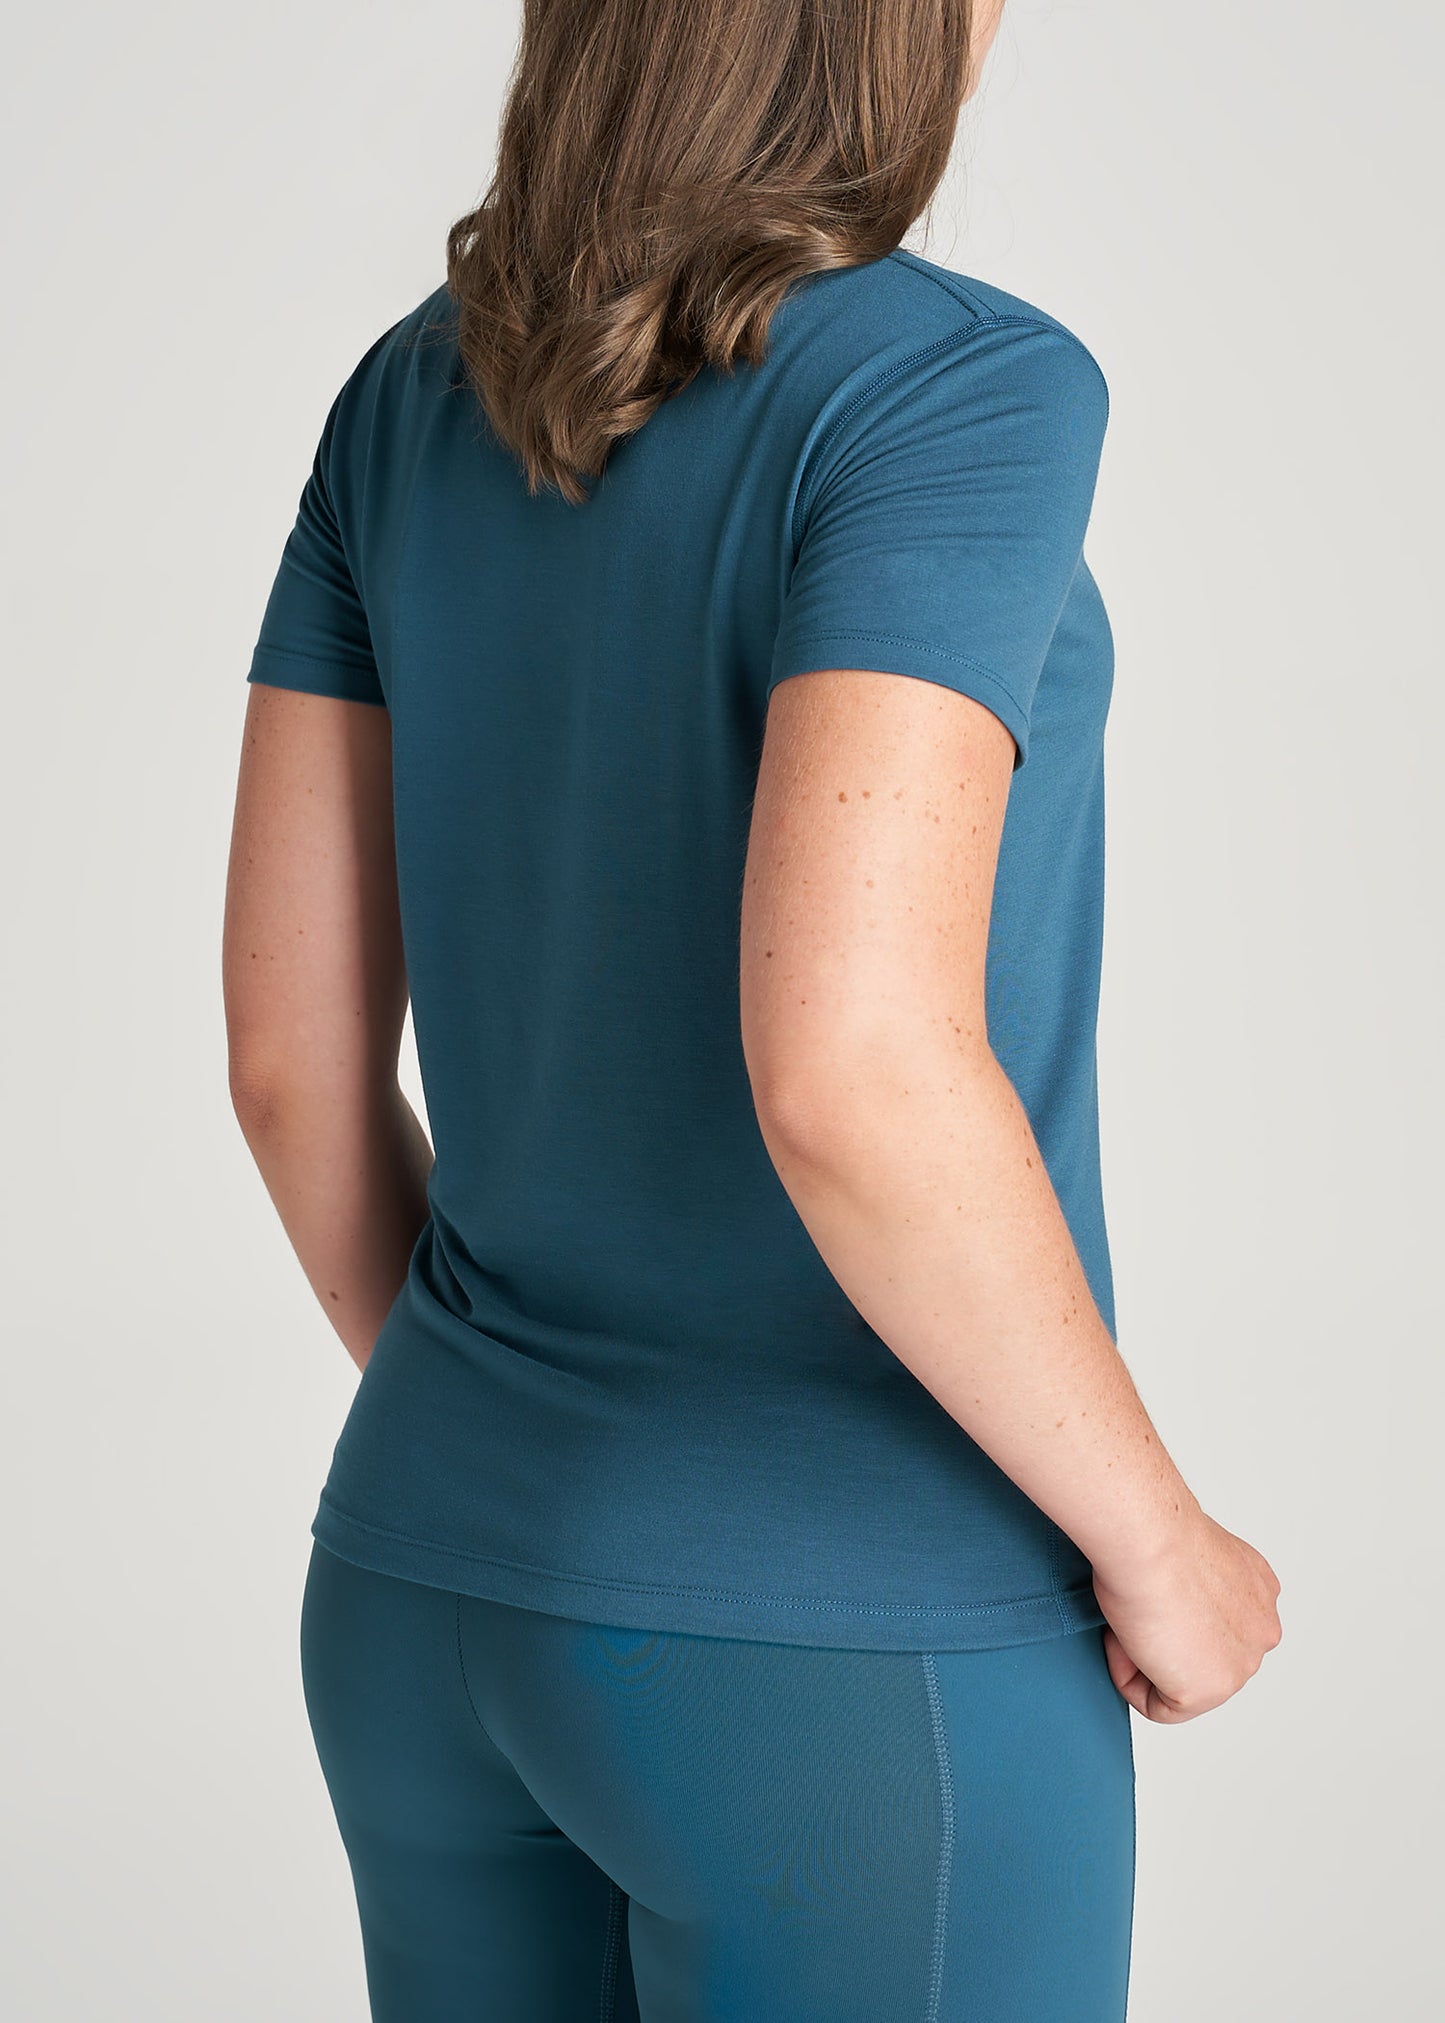 Short Sleeve V-Neck In Deep Water - Shirts For Tall Women